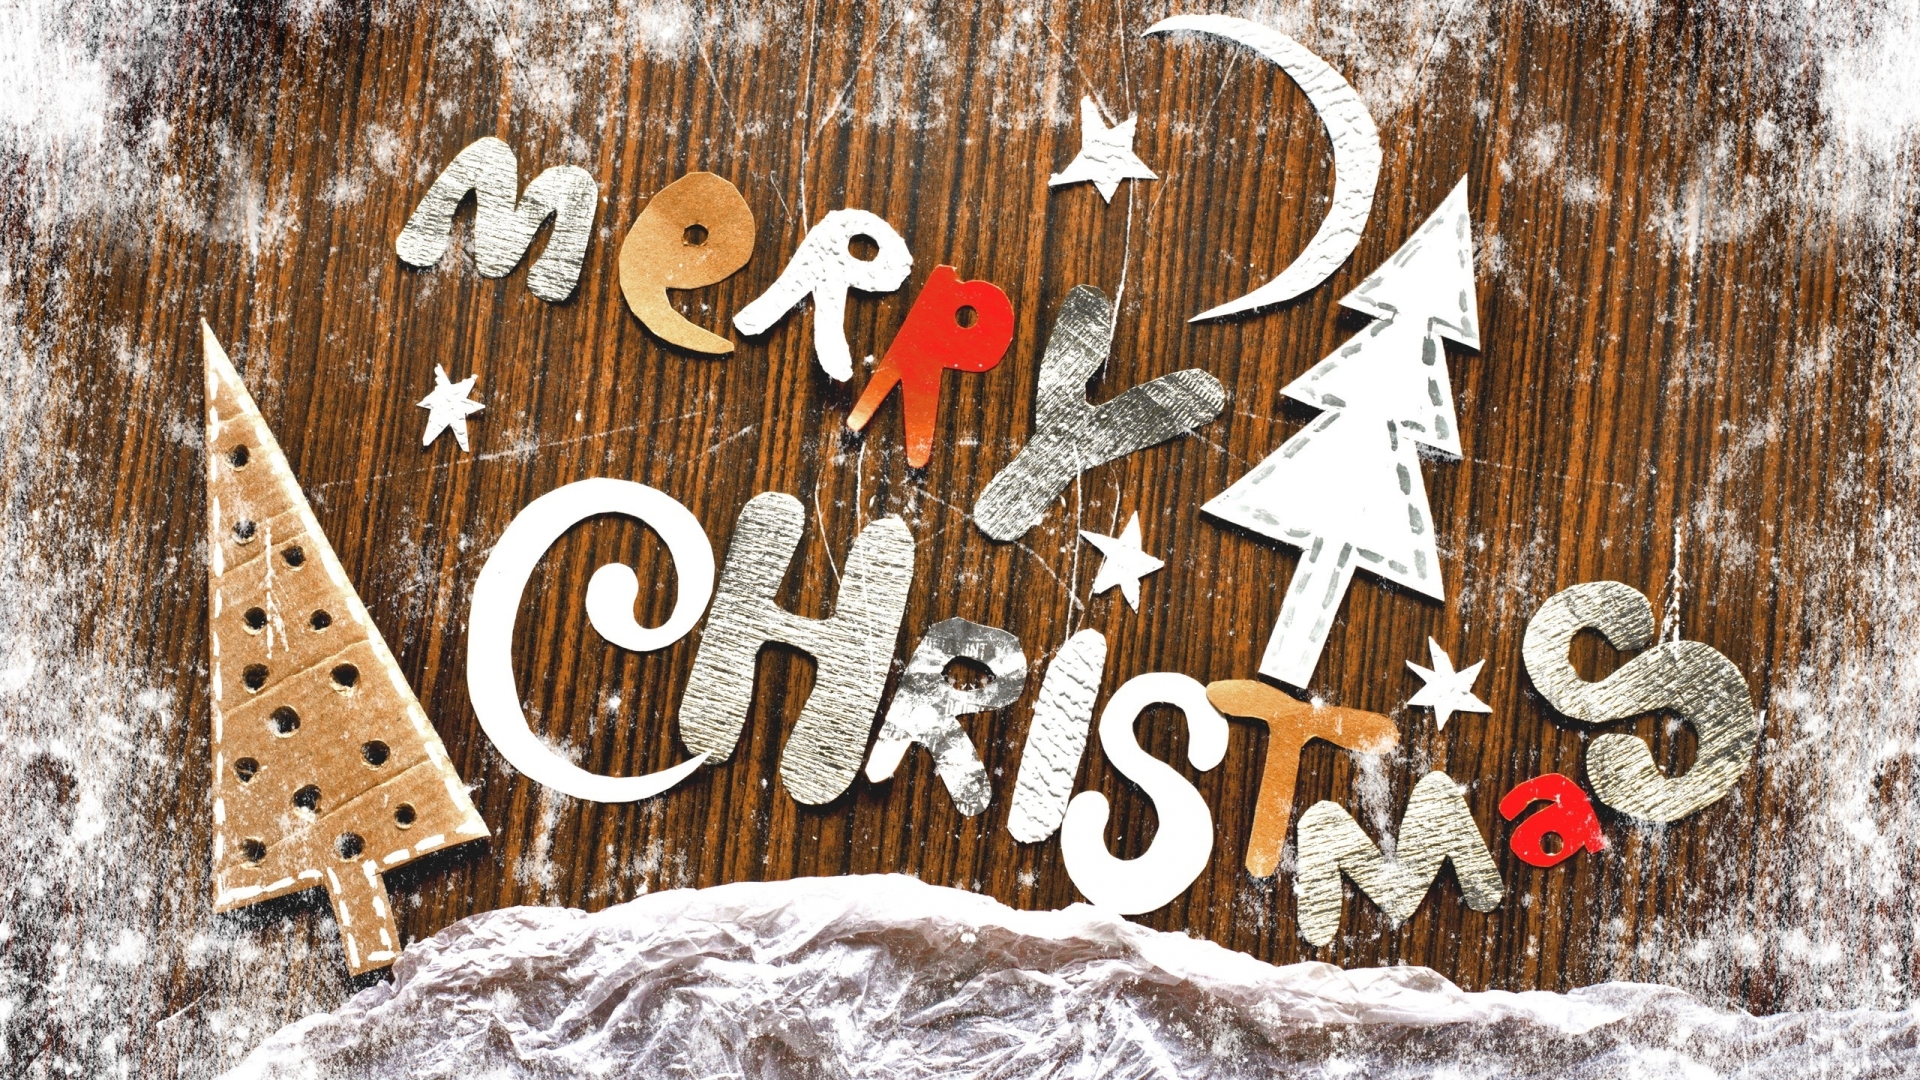 Merry Christmas Wish for 1920 x 1080 HDTV 1080p resolution